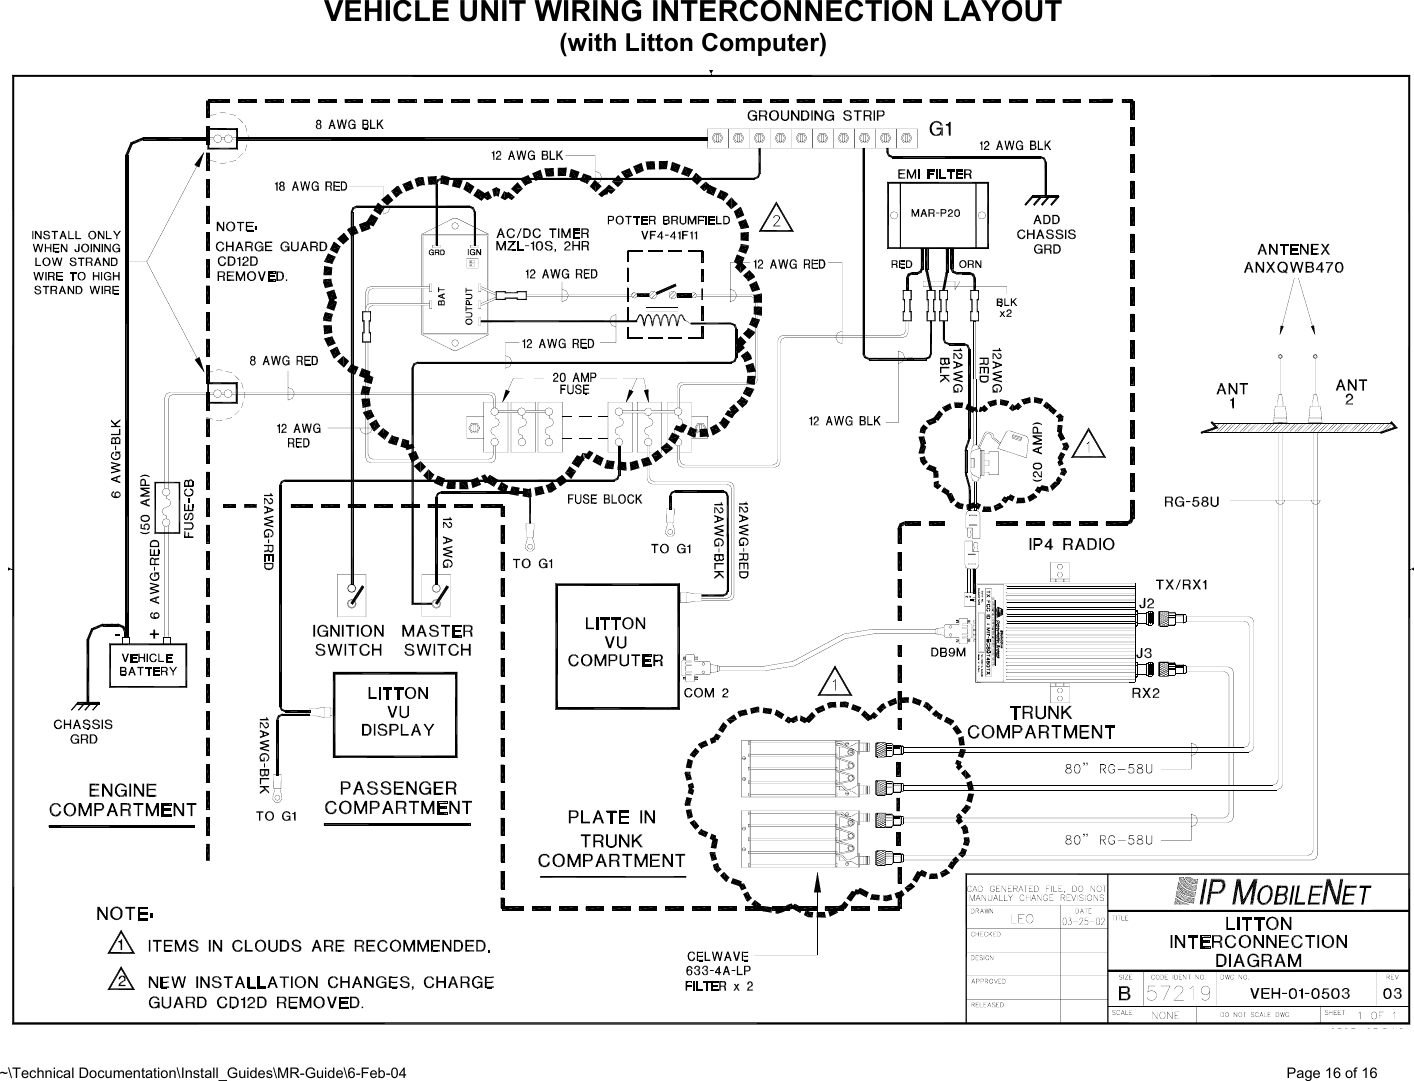 ~\Technical Documentation\Install_Guides\MR-Guide\6-Feb-04   Page 16 of 16 VEHICLE UNIT WIRING INTERCONNECTION LAYOUT (with Litton Computer)          